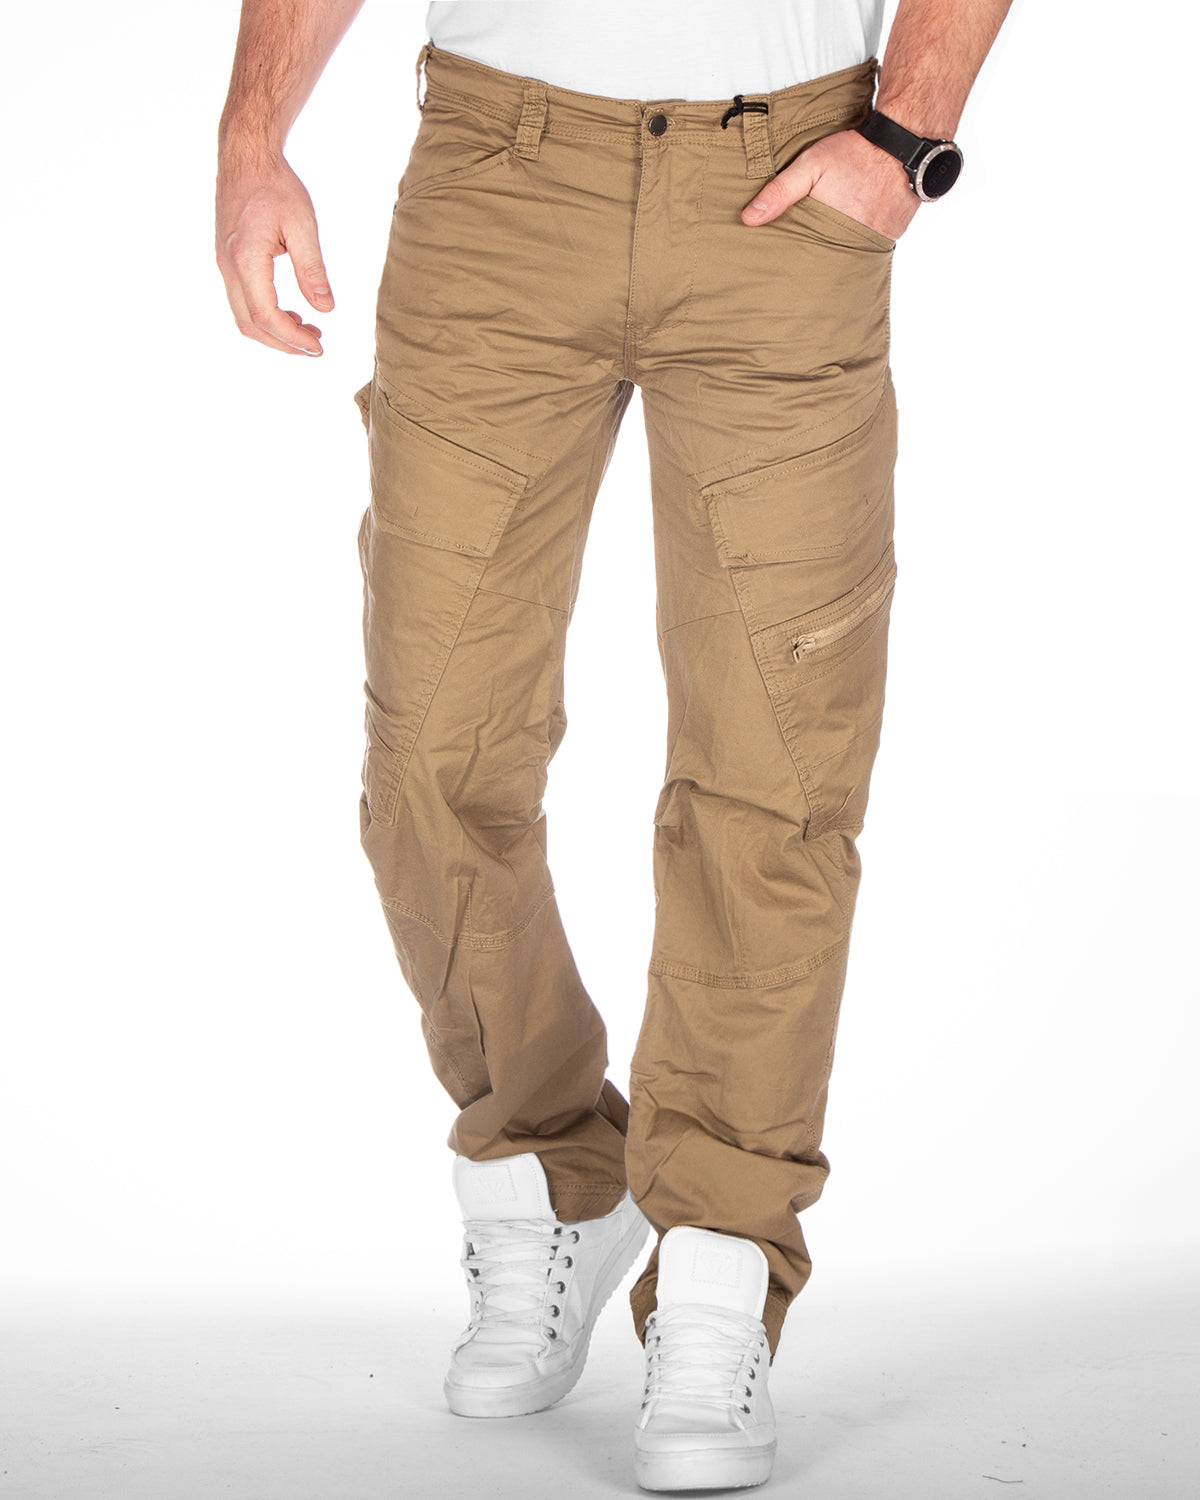 Unbranded Mens Camouflage Cargo Pants Straight Leg Loose Fit India | Ubuy